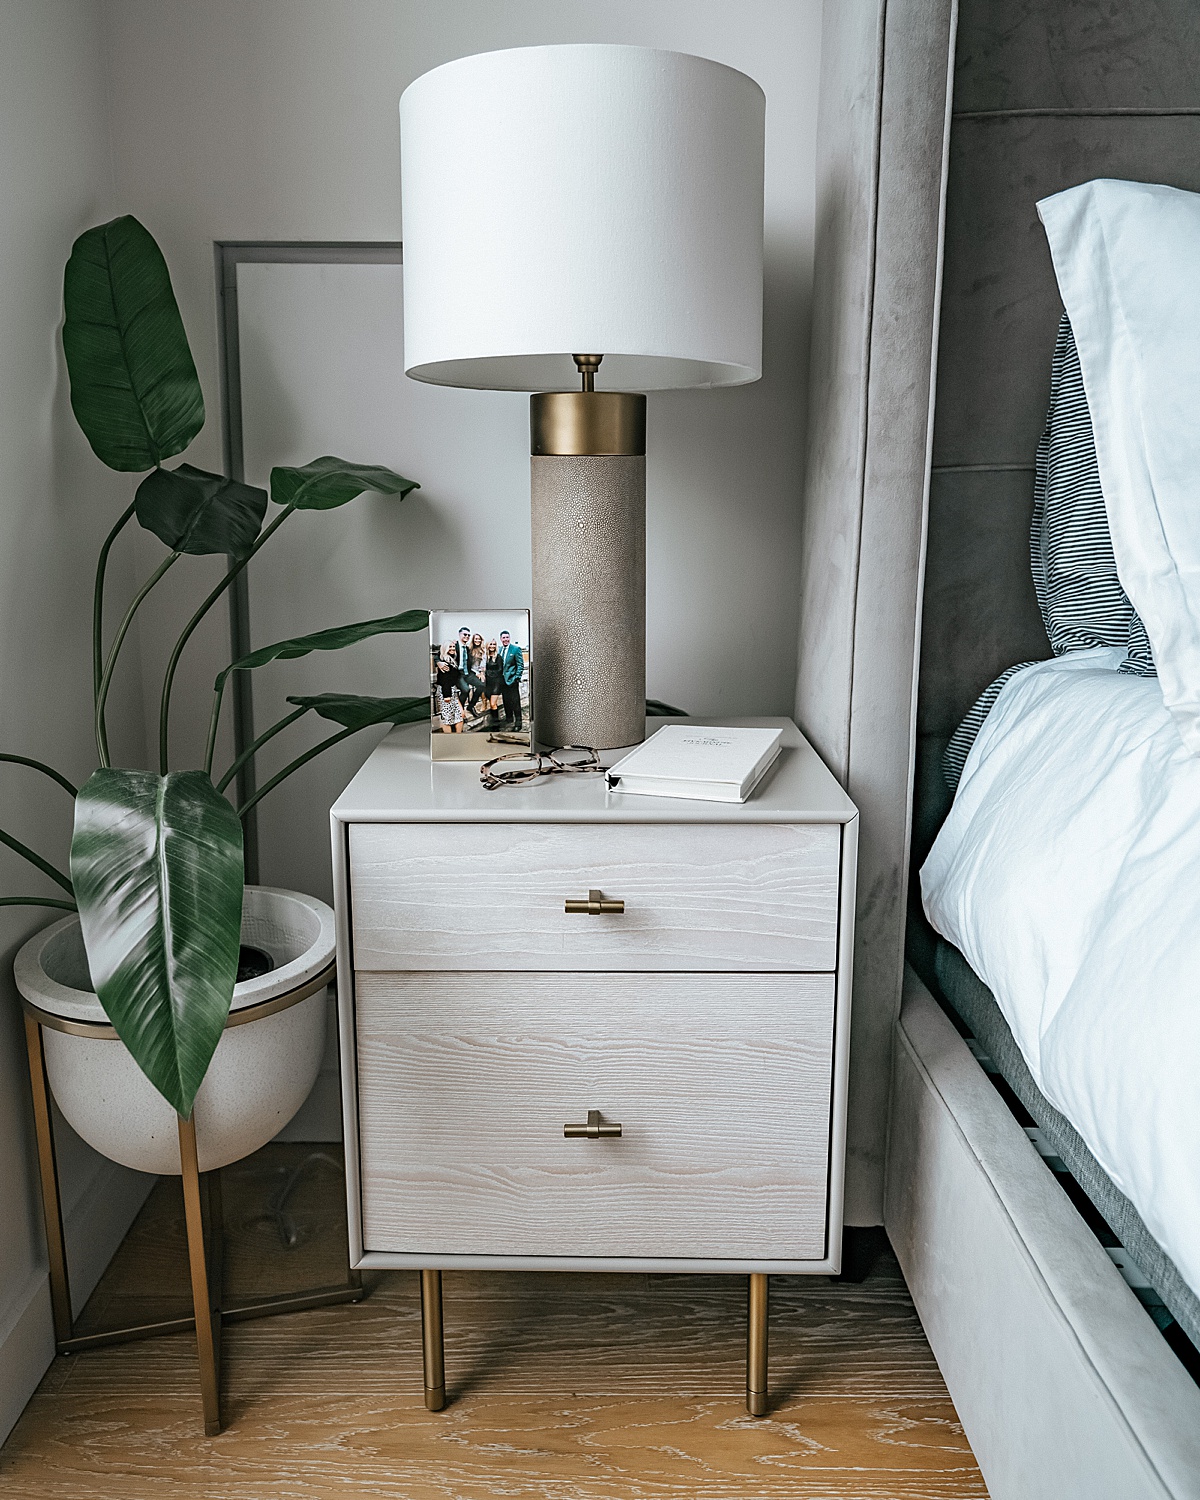 west elm night stand, shagreen lamp, bedroom plant, fake plant, shagreen lamp, nyc apartment, home decor tips, affordable home decor, olivia rink bedroom, olivia rink apartment, olivia rink bedroom, affordable decorating, new york life, new york apartment, nyc living, west elm, kathy kuo home, home decor, bedroom decor, frame, bedside frame, gold frame